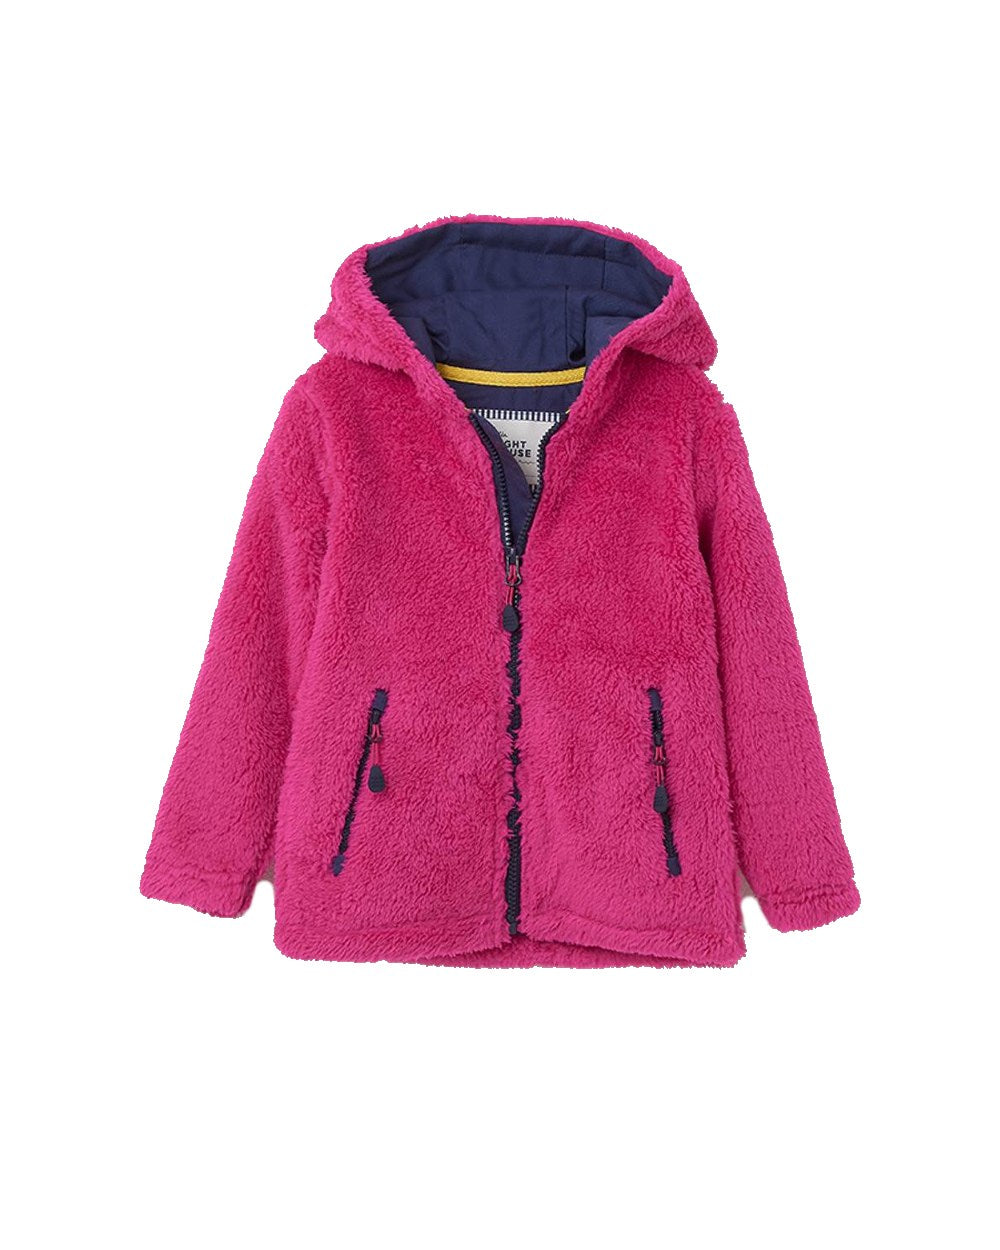 Lighthouse Gracie Girls Fleece in Bright Pink 